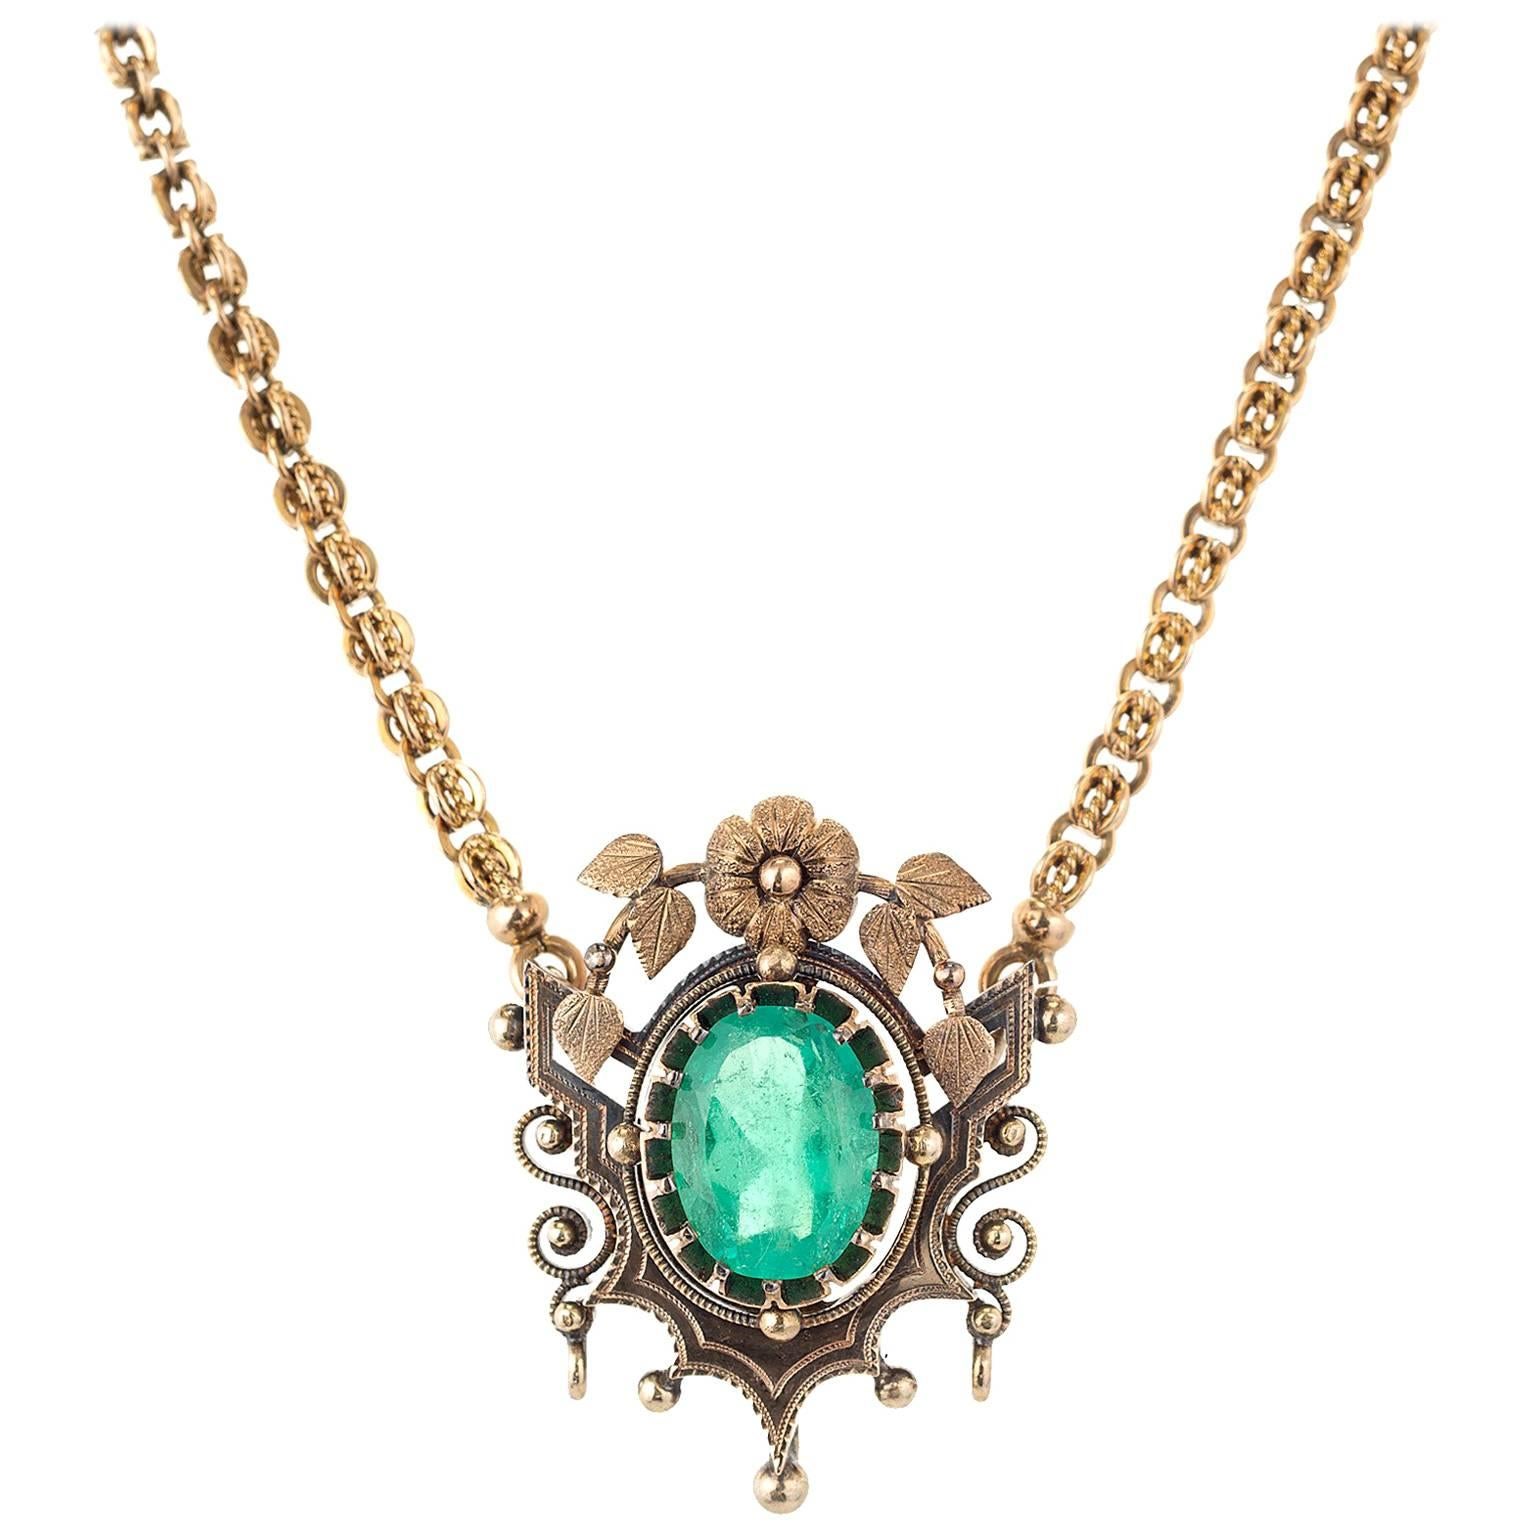 GIA Certified 4.50 Carat Oval Emerald Victorian Gold Necklace Pendant